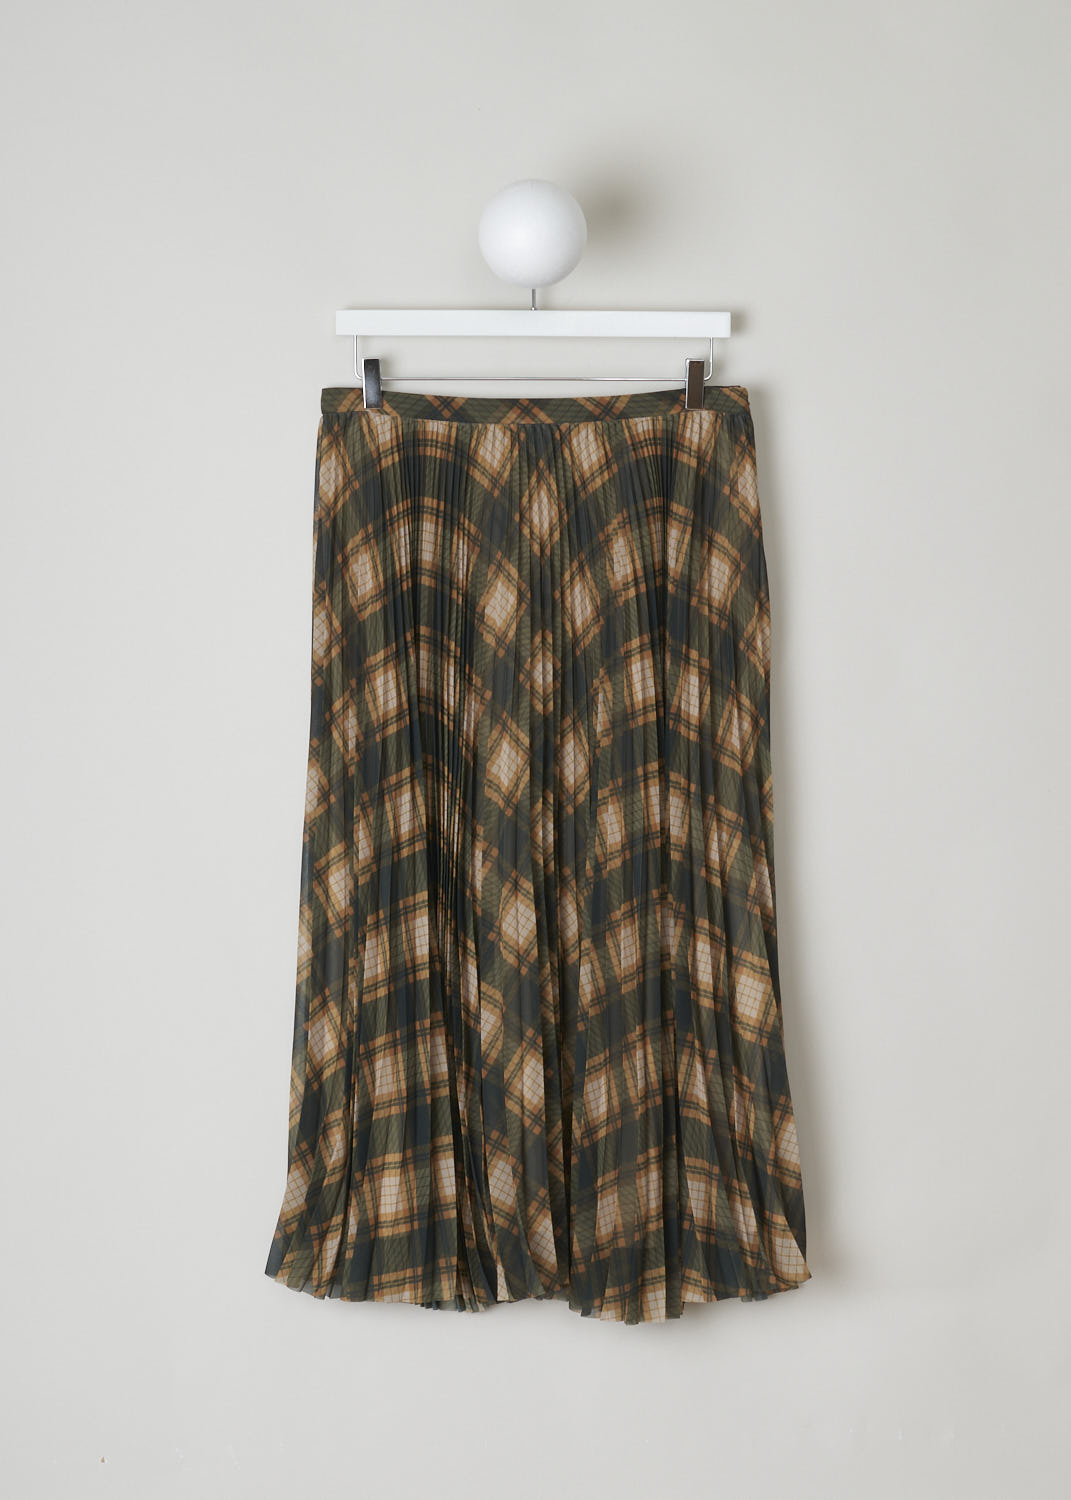 DRIES VAN NOTEN, GREEN AND ORANGE CHECKED PLEATED SKIRT, SAX_1228_WW_SKIRT_DESC, Print, Green, Front, This accordion pleated maxi skirt is made with an argyle pattern in green and orange tones. The skirt has a narrow waistband and a concealed side zipper. The skirt is fully lined